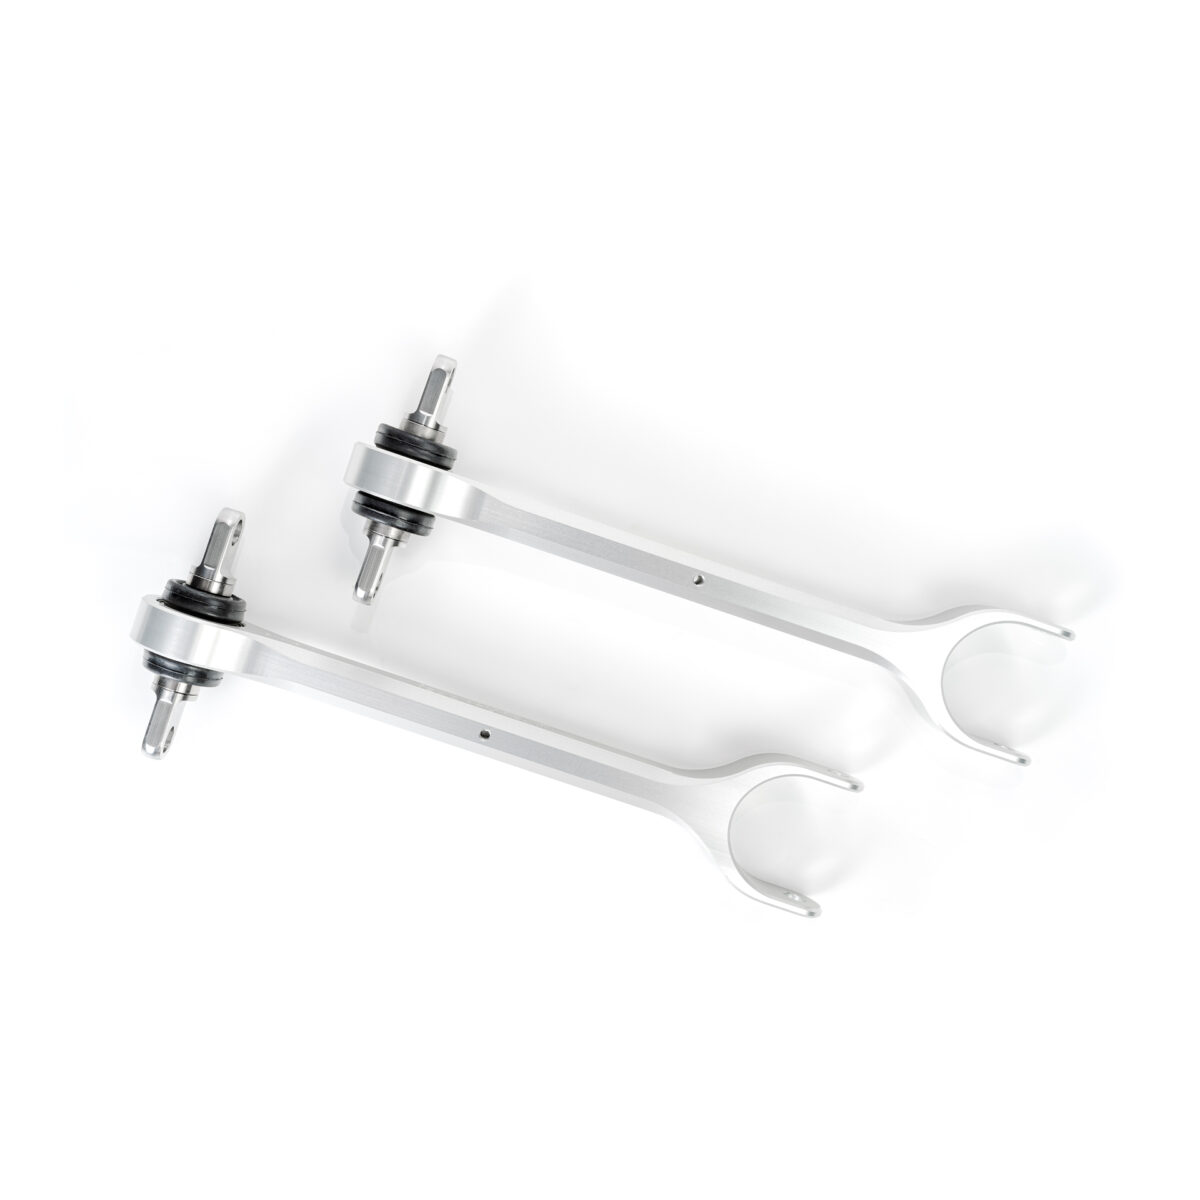 Unplugged Performance - Model S/X Plaid Billet Rear Lower Arm Set (lower front link)